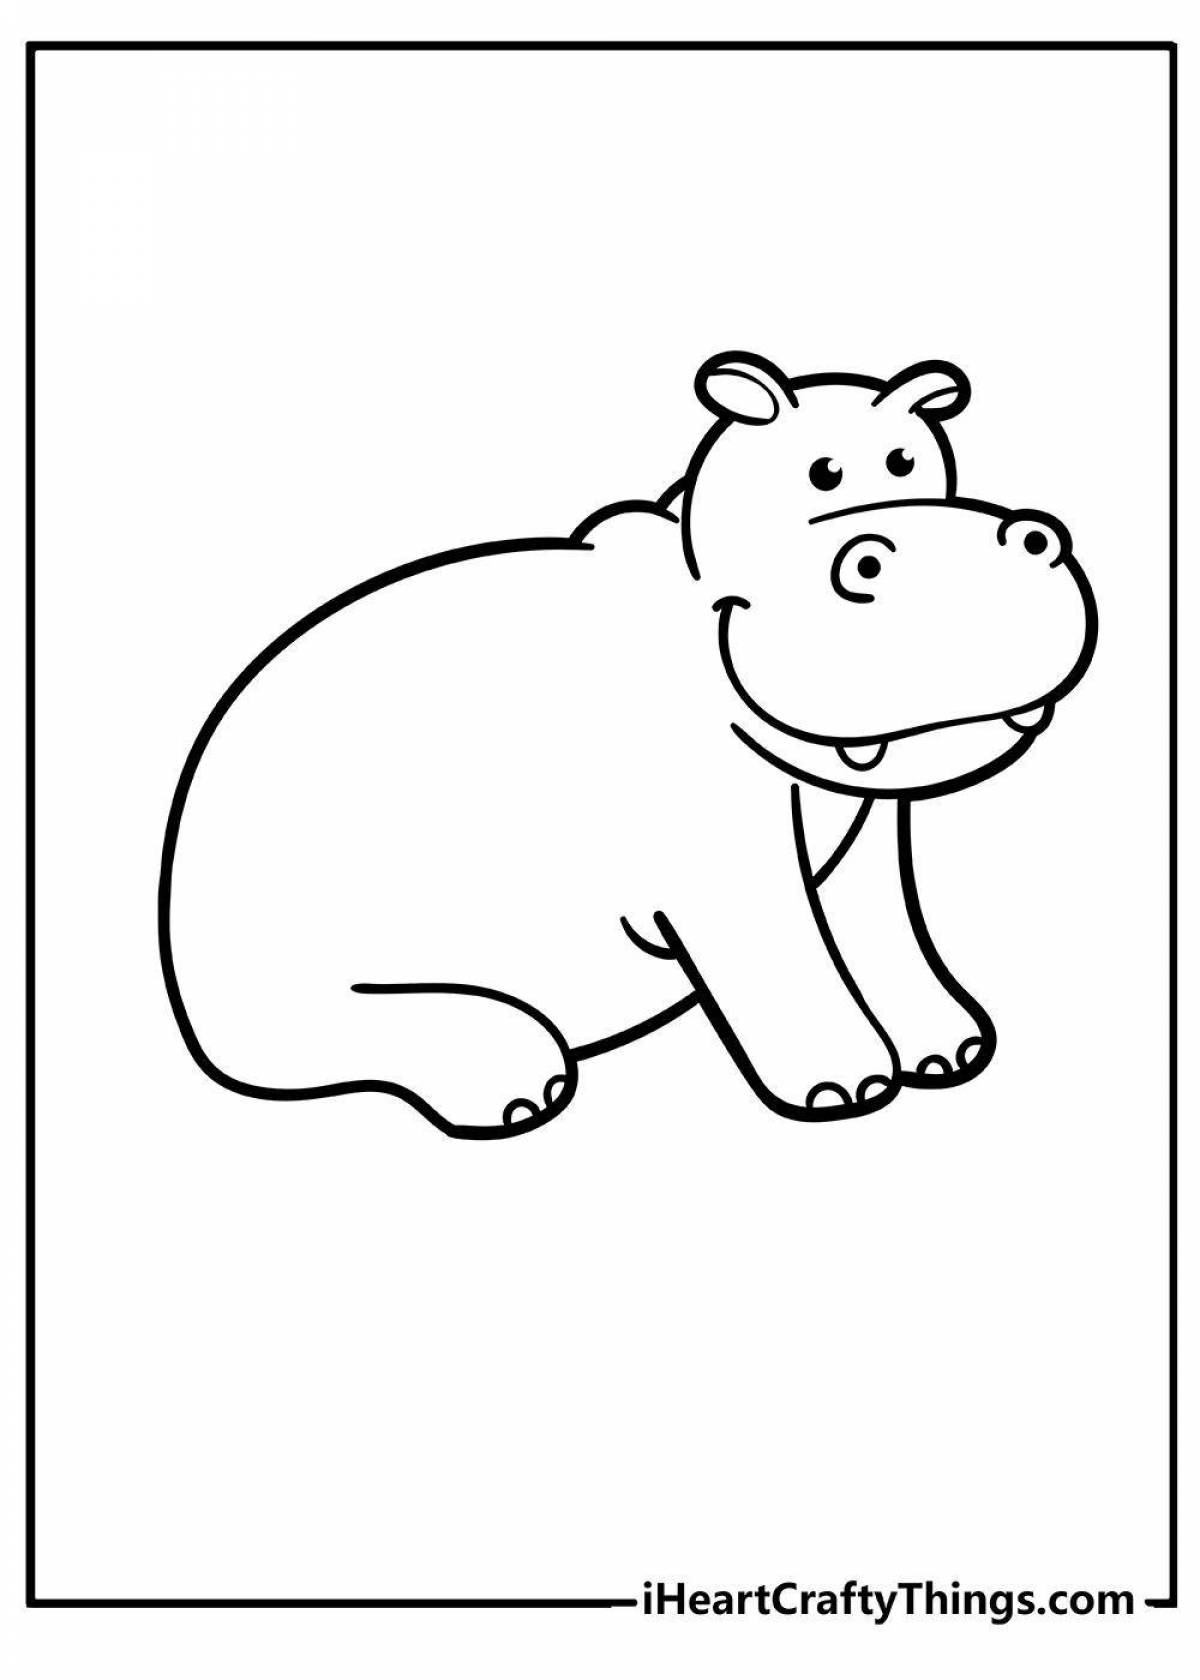 Creative hippo coloring book for 3-4 year olds